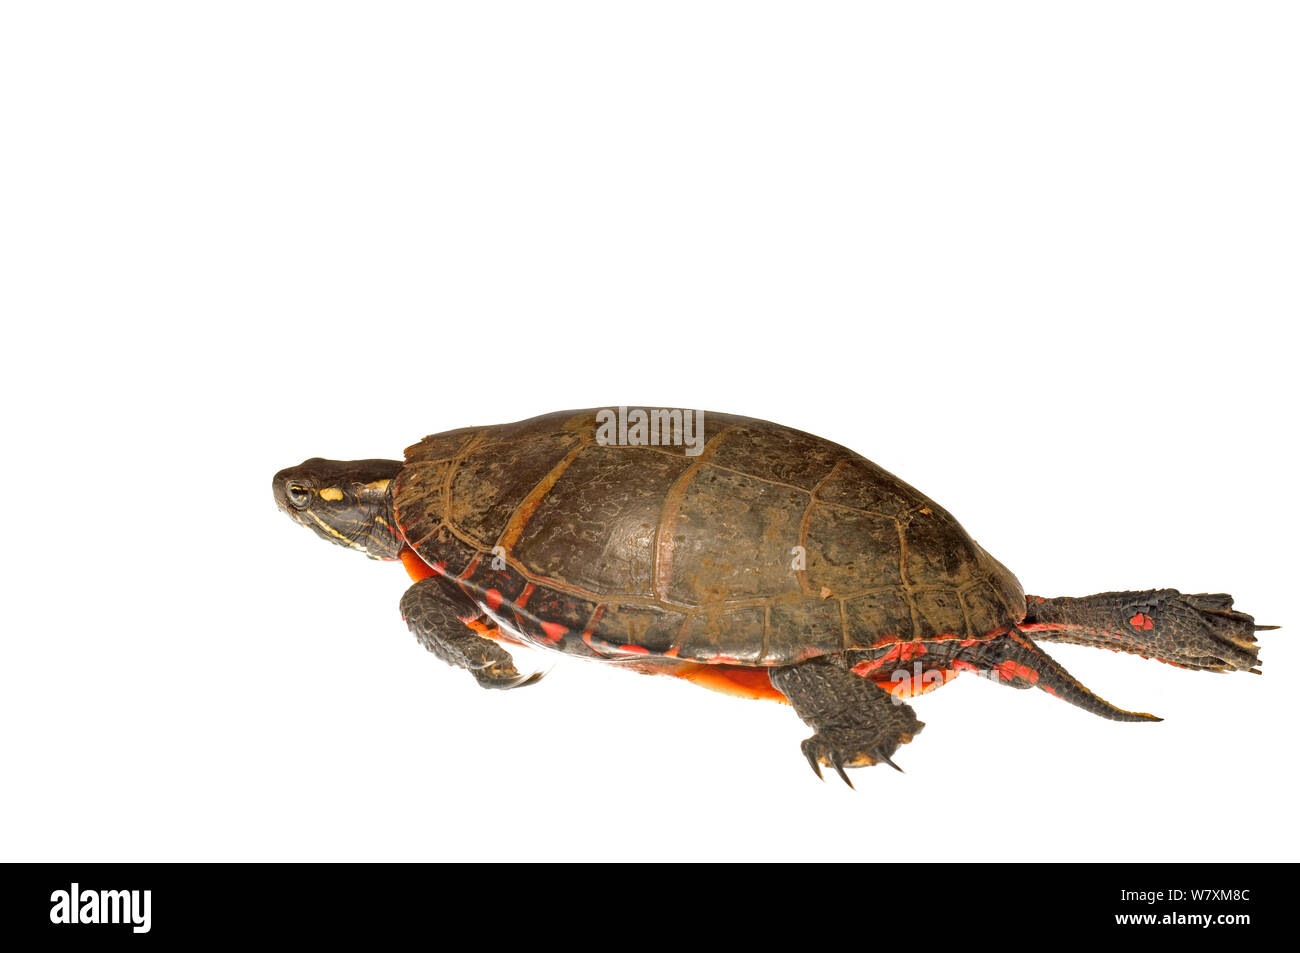 Painted Turtle (Chrysemys picta) Southern Appalachians, South Carolina, United States, April. Meetyourneighbours.net project Stock Photo